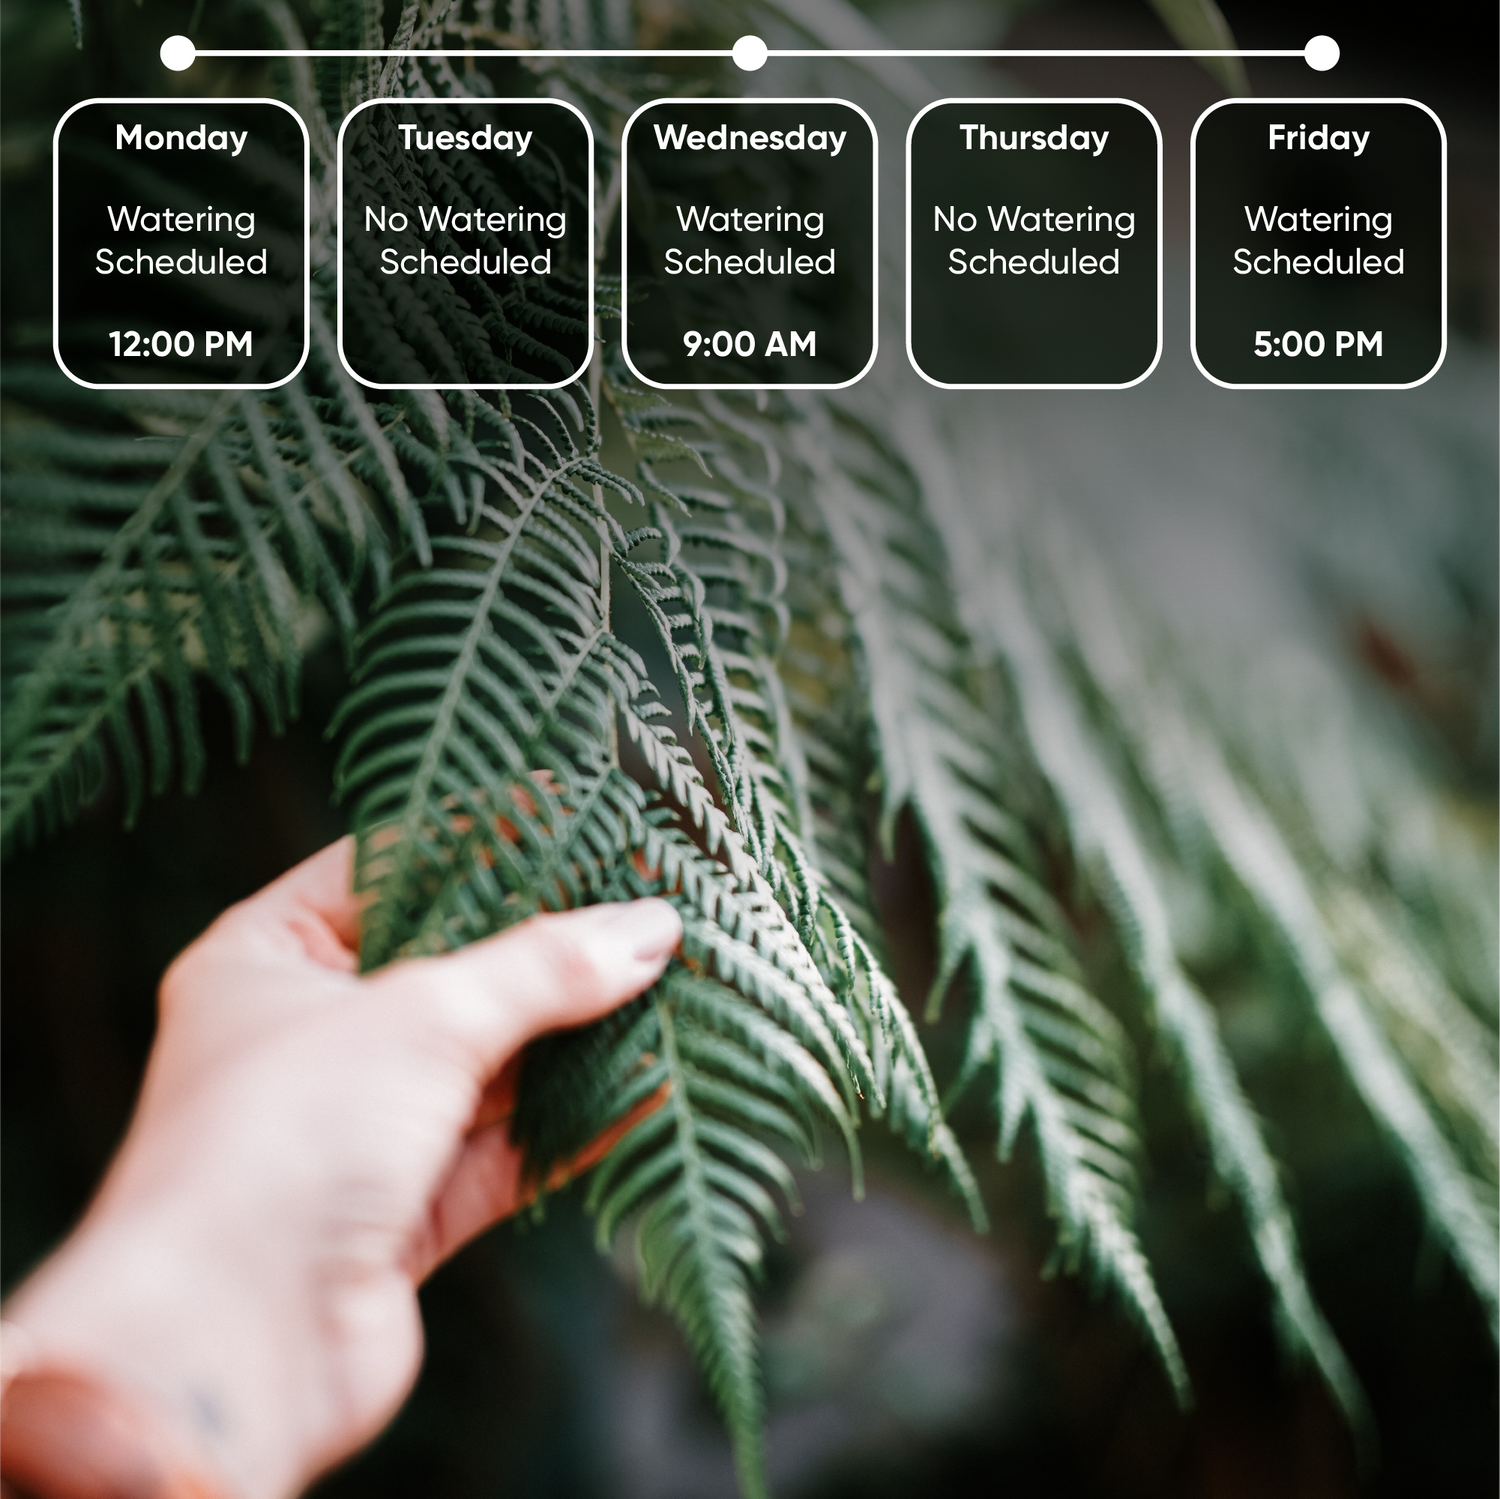 Person touching a plant leaf with watering schedule overlay 